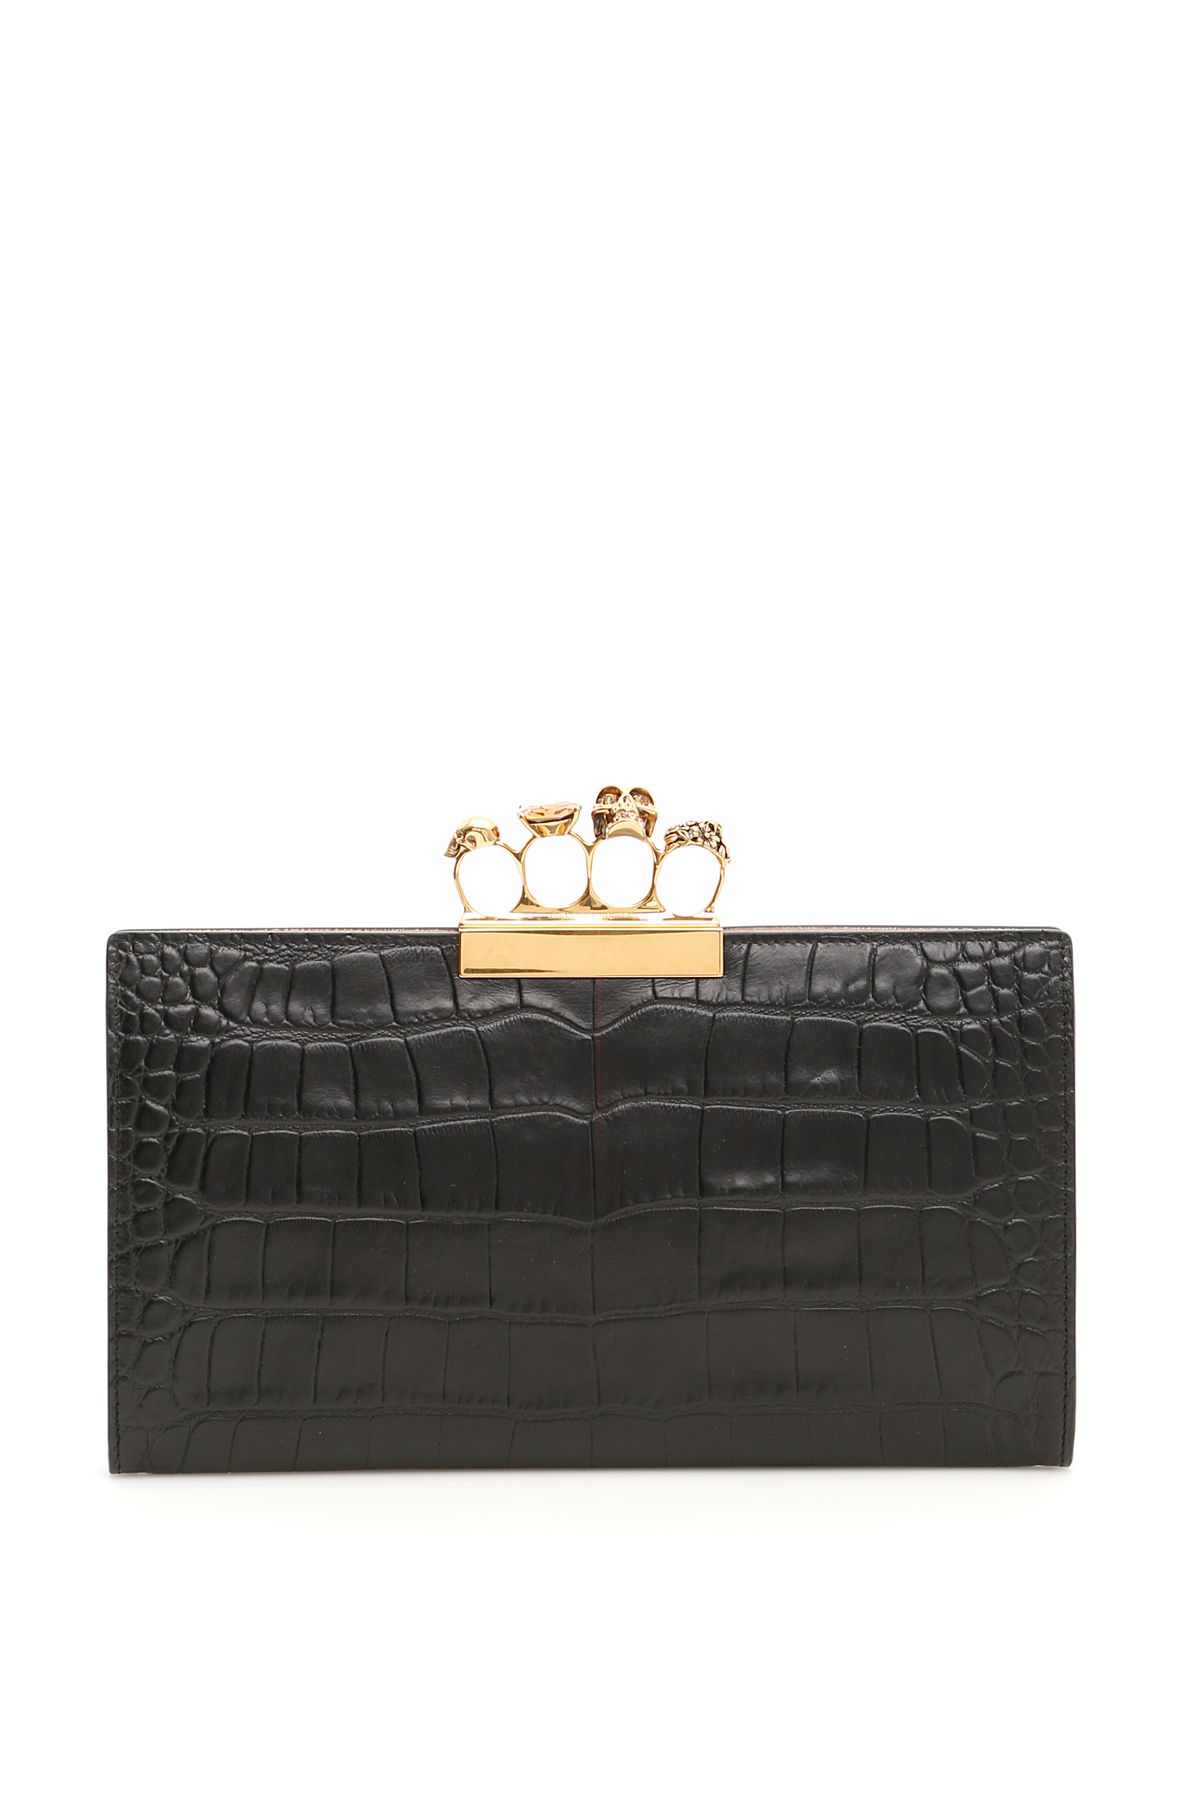 Alexander McQueen - Four Ring Skull Clutch | ABOUT ICONS